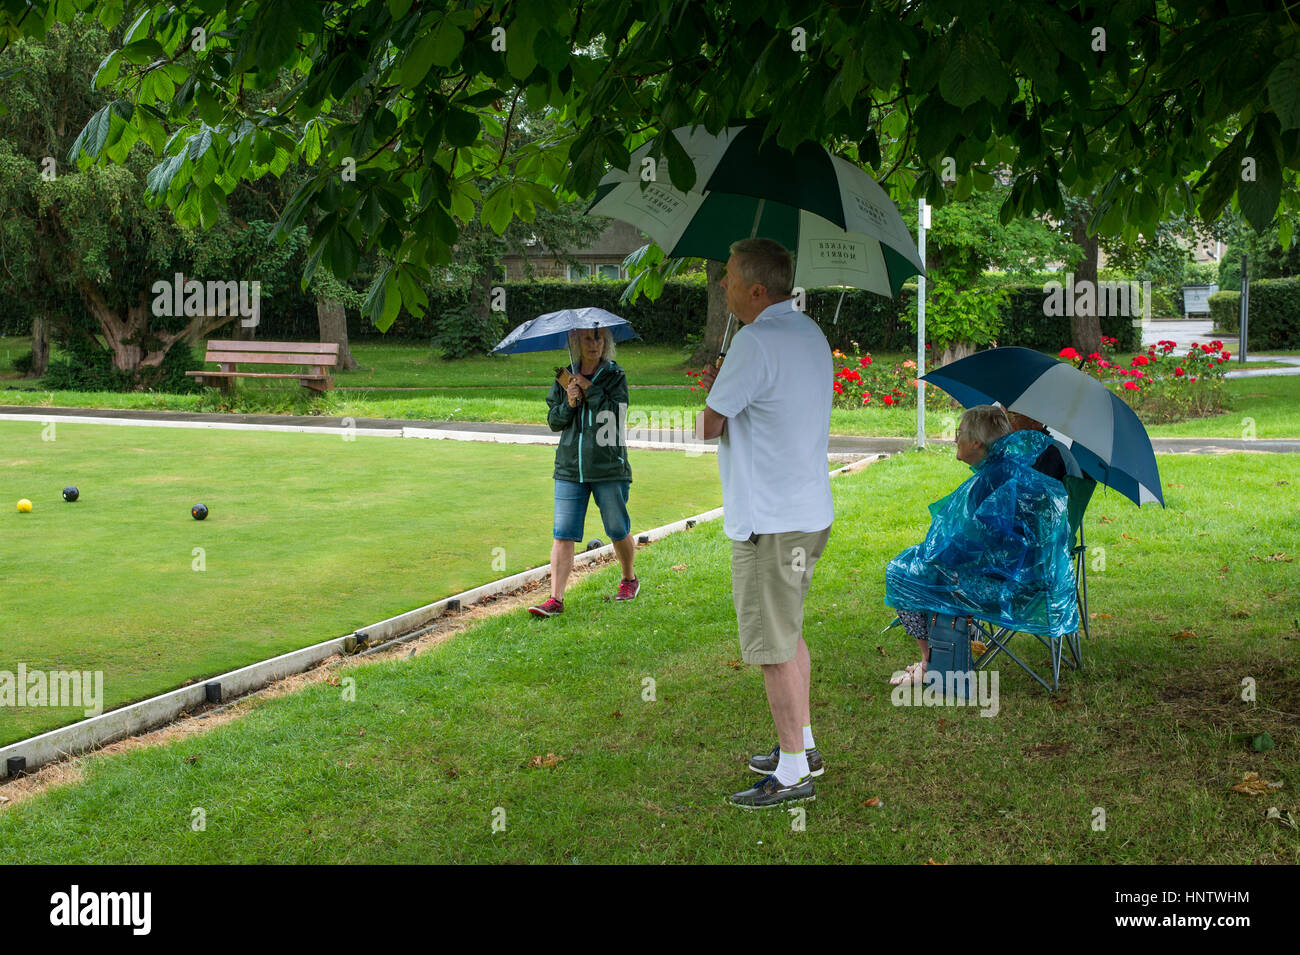 Spectators, with umbrellas, shelter from the rain at a crown green bowling match - village bowling green, Burley In Wharfedale, West Yorkshire, GB. Stock Photo